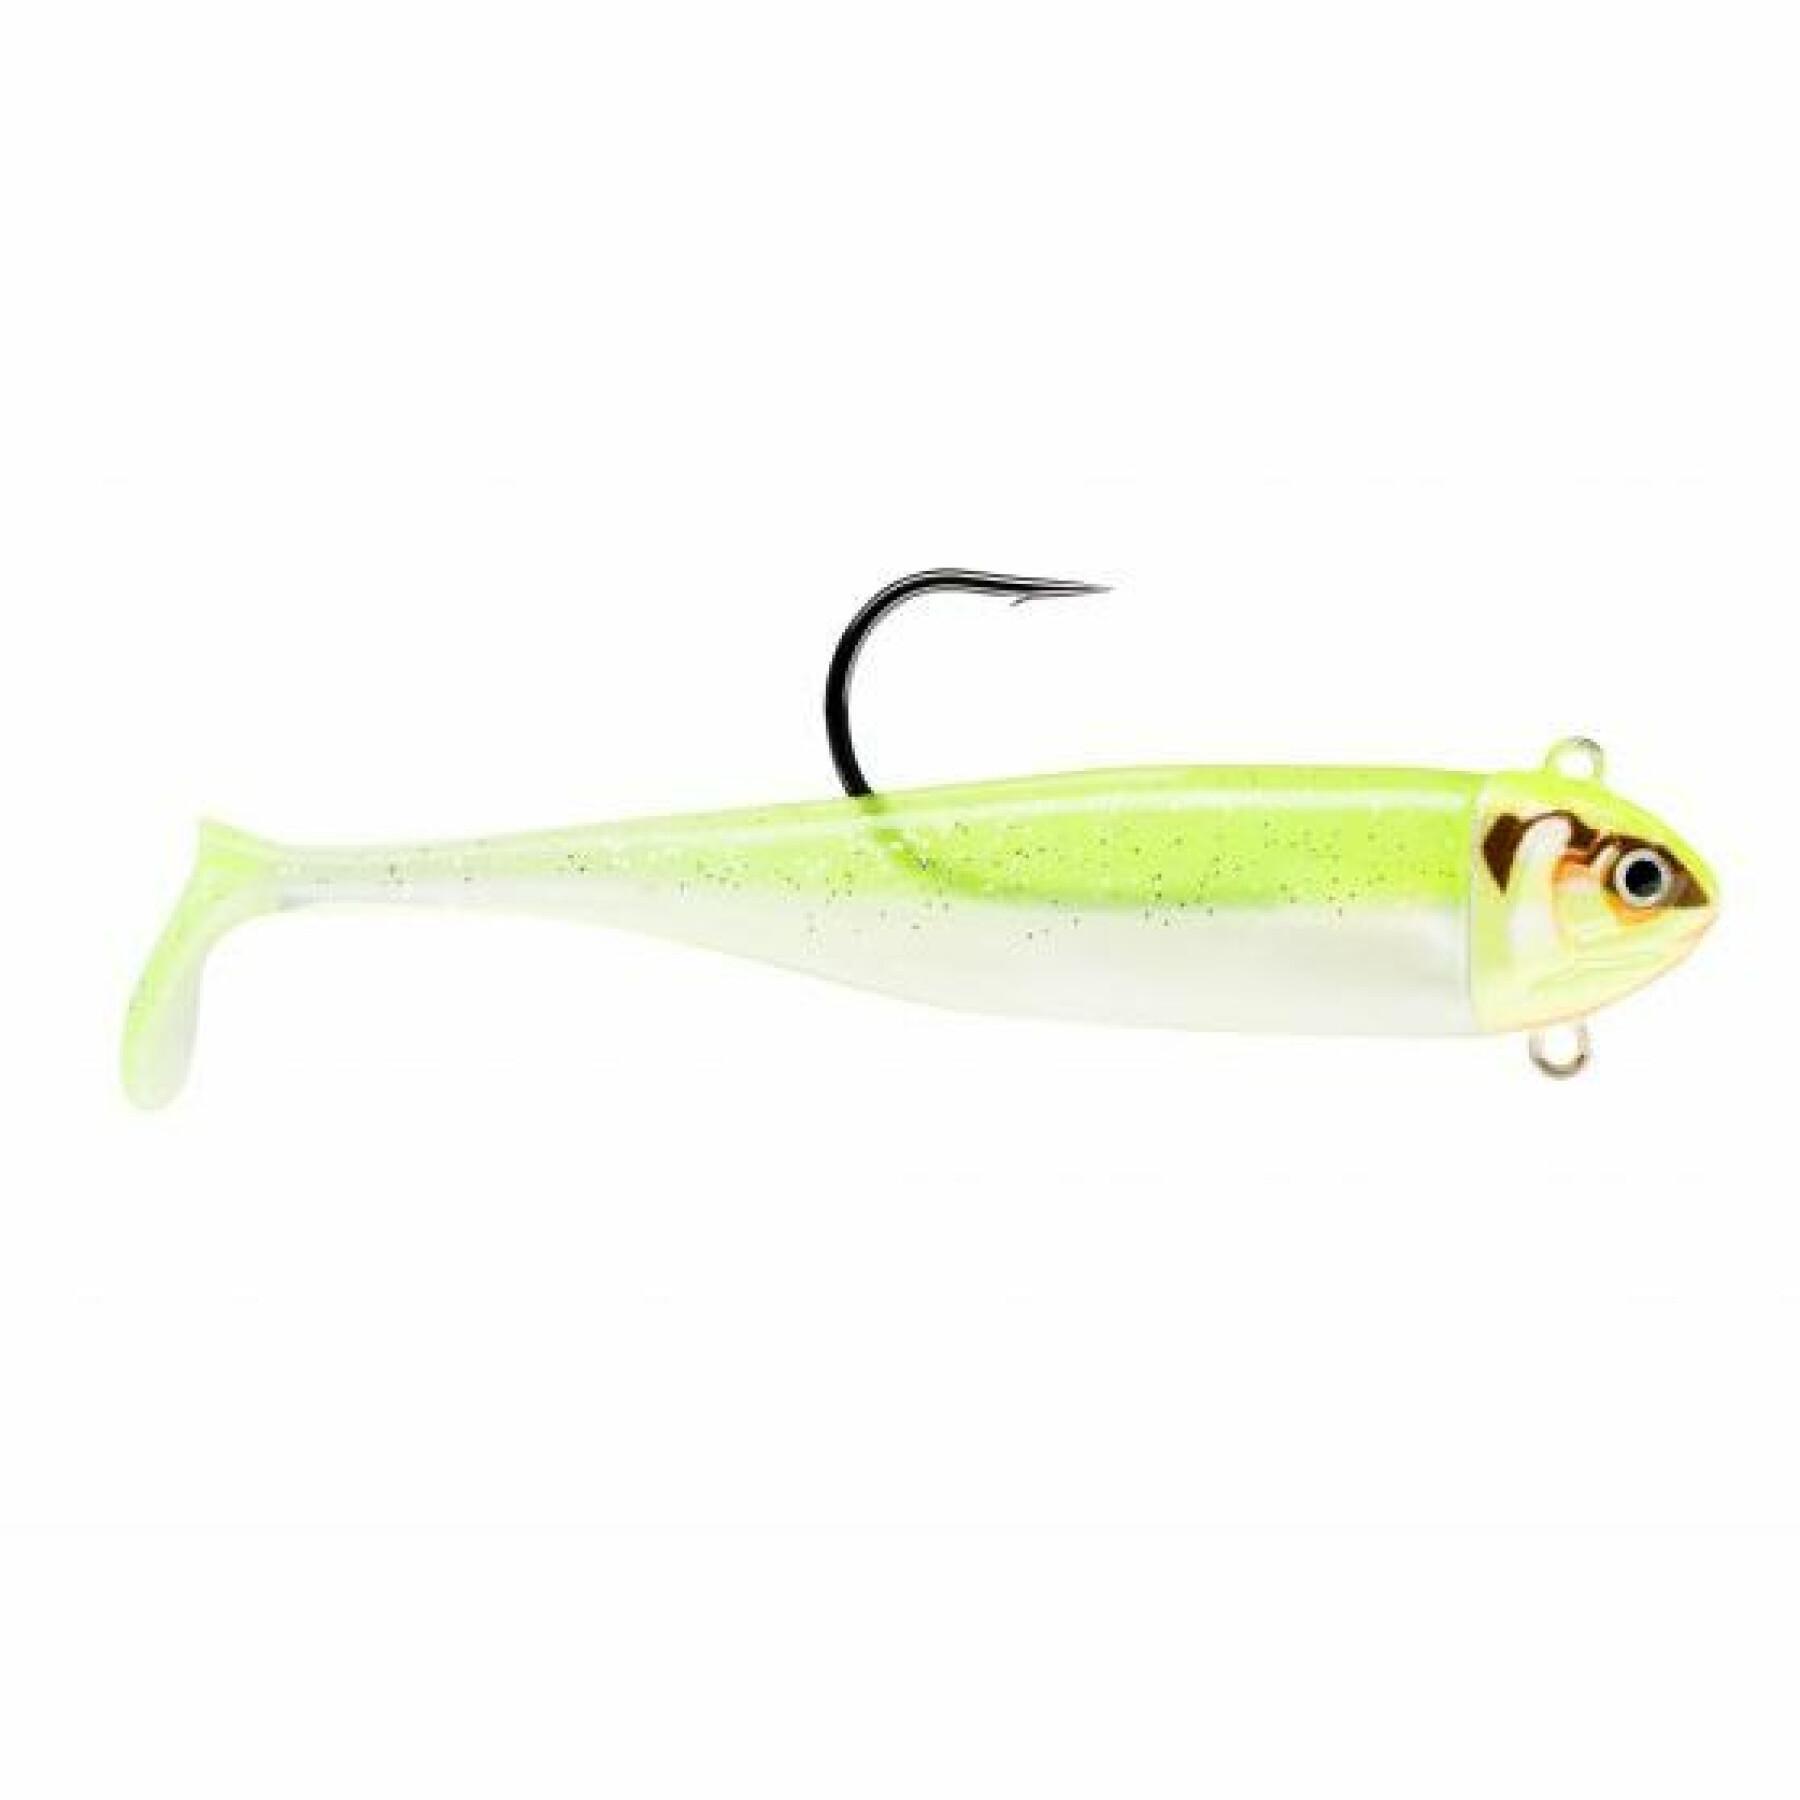 Soft lure Storm 360° gt coastal biscay deep minnow - Soft lures